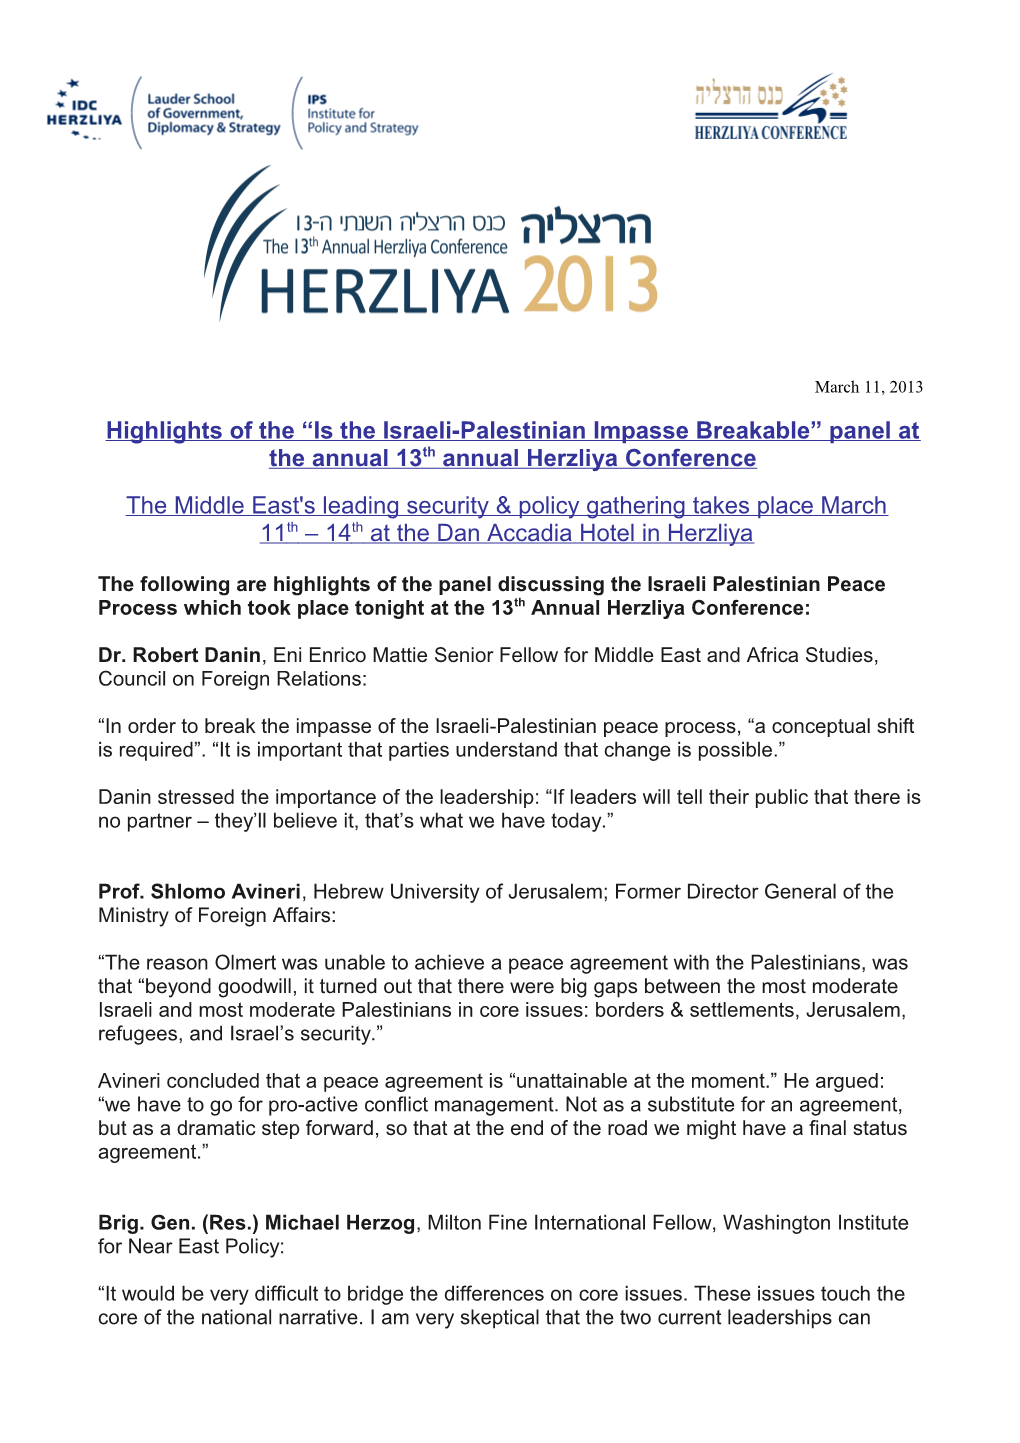 Highlights of the Is the Israeli-Palestinian Impasse Breakable Panel at the Annual 13Th